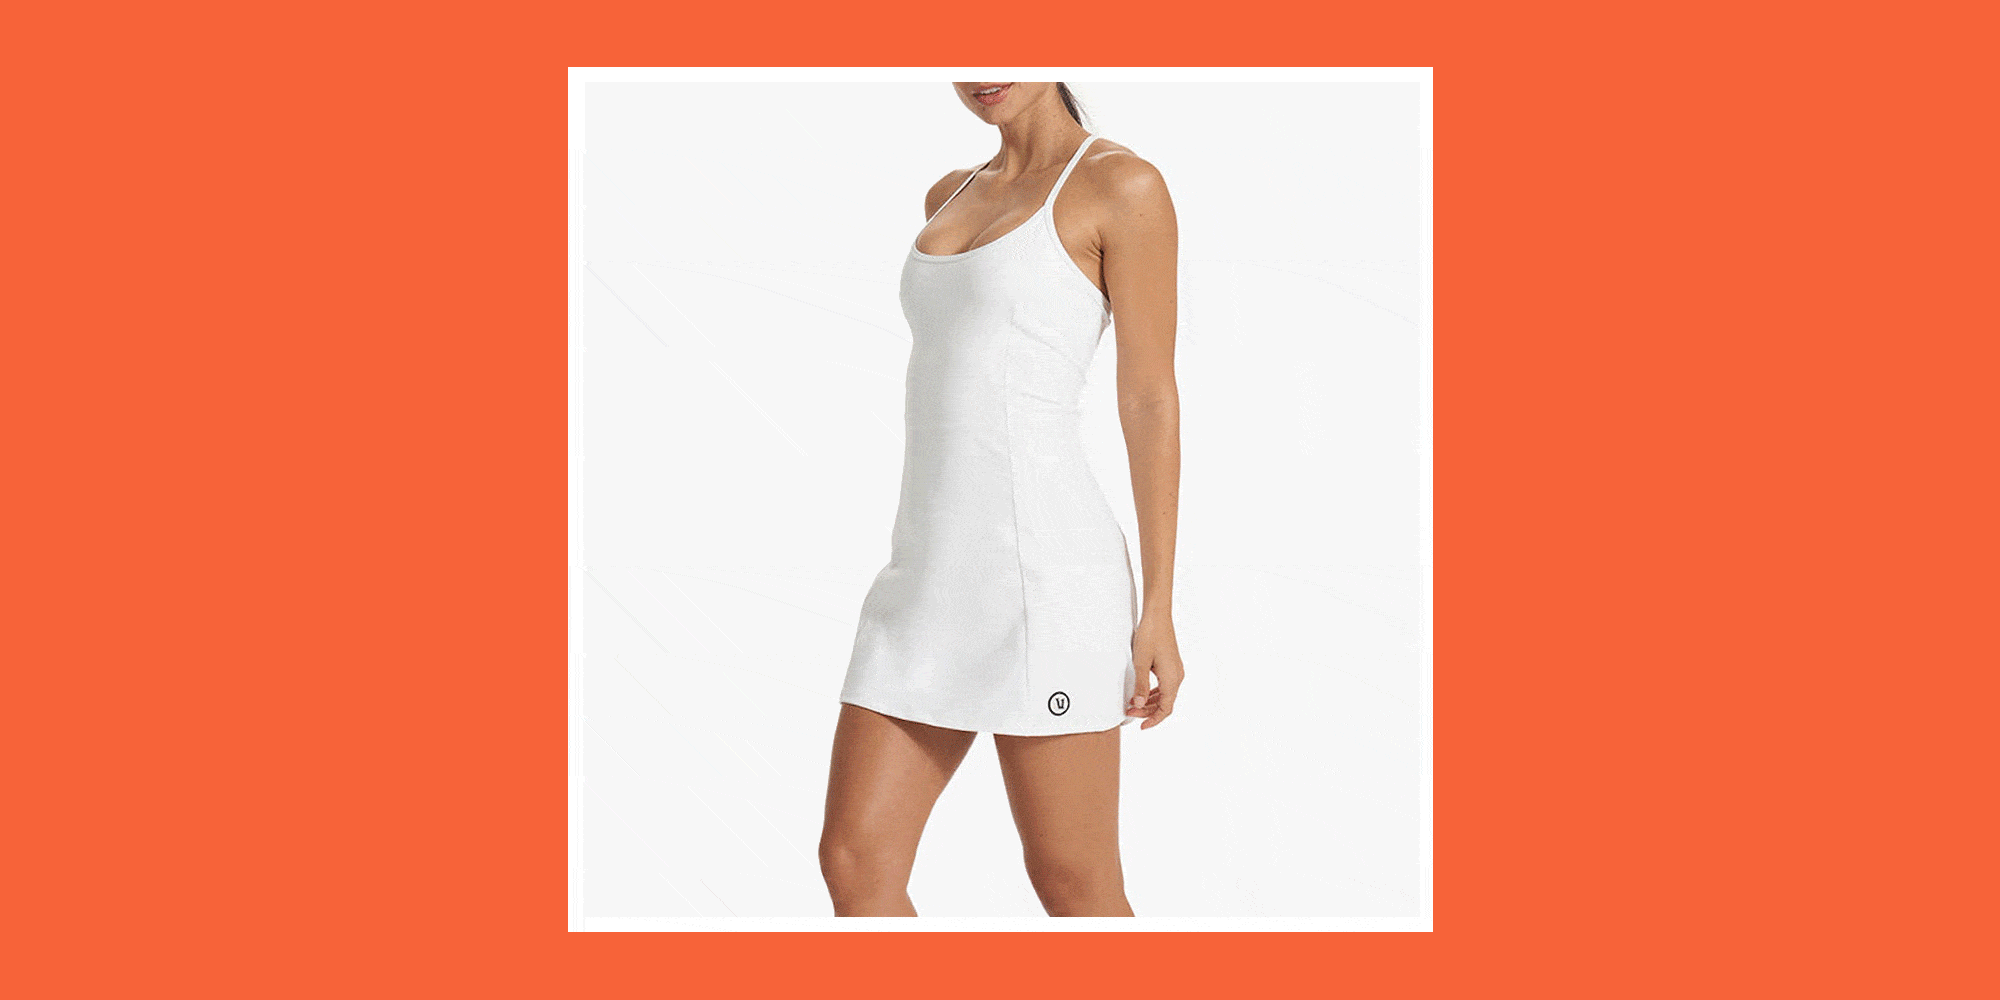 Womens Athletic Dress Sleeveless Hot Shot Workout Cami Dress Tennis Onesie  Romper Built-in Bra & Shorts/Two Piece Outfit